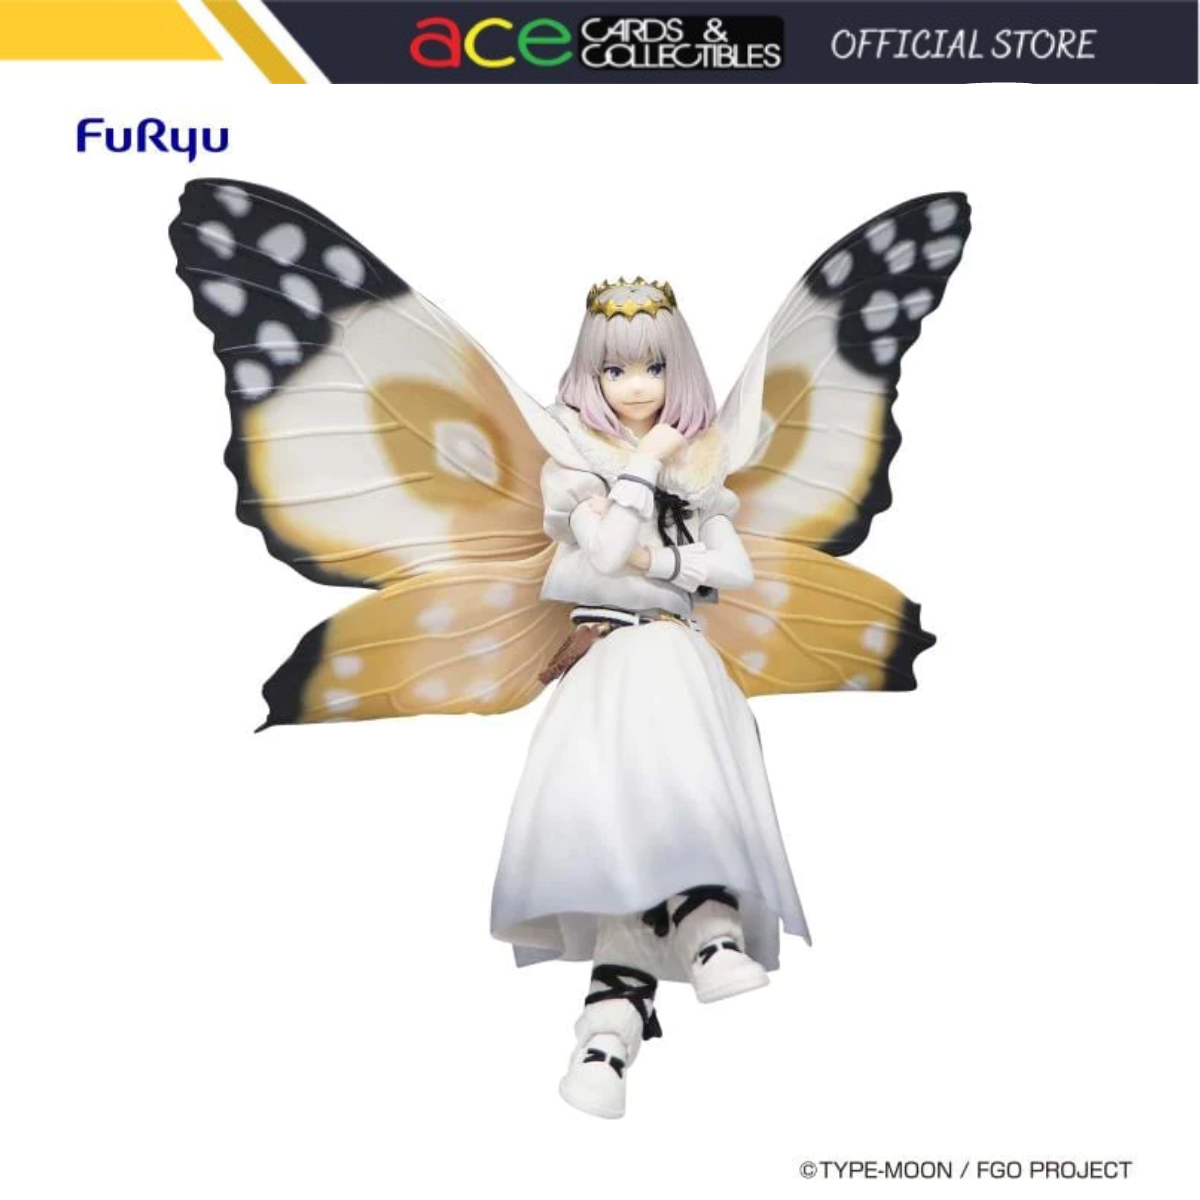 Fate/Grand Order Noodle Stopper Figure "Pretender Oberon"-FuRyu-Ace Cards & Collectibles